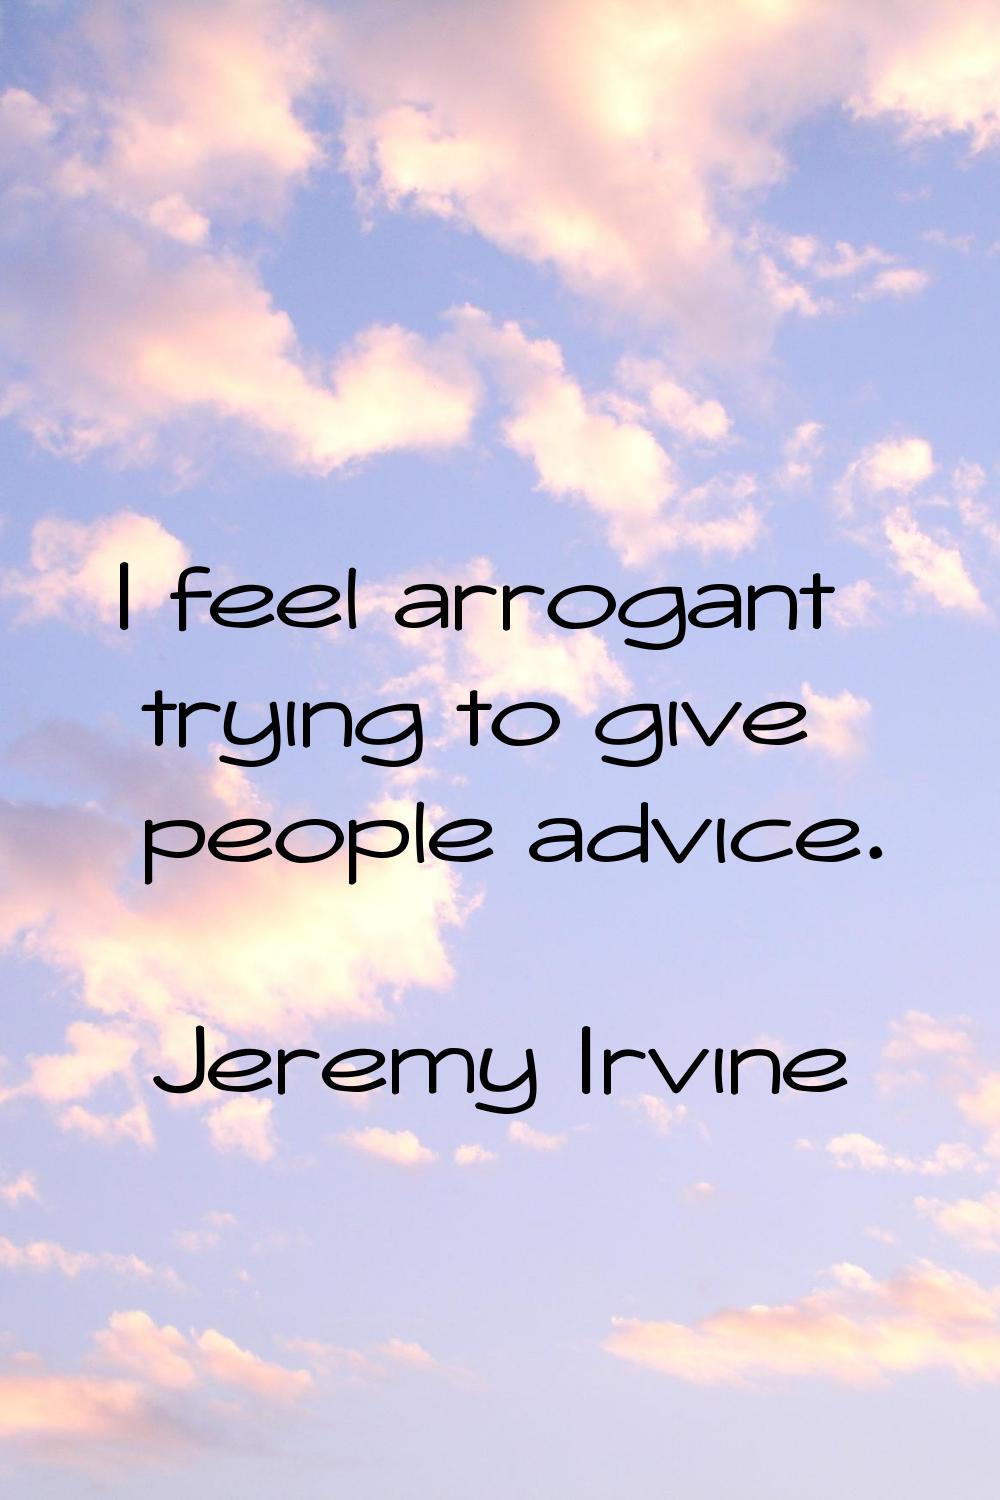 I feel arrogant trying to give people advice.